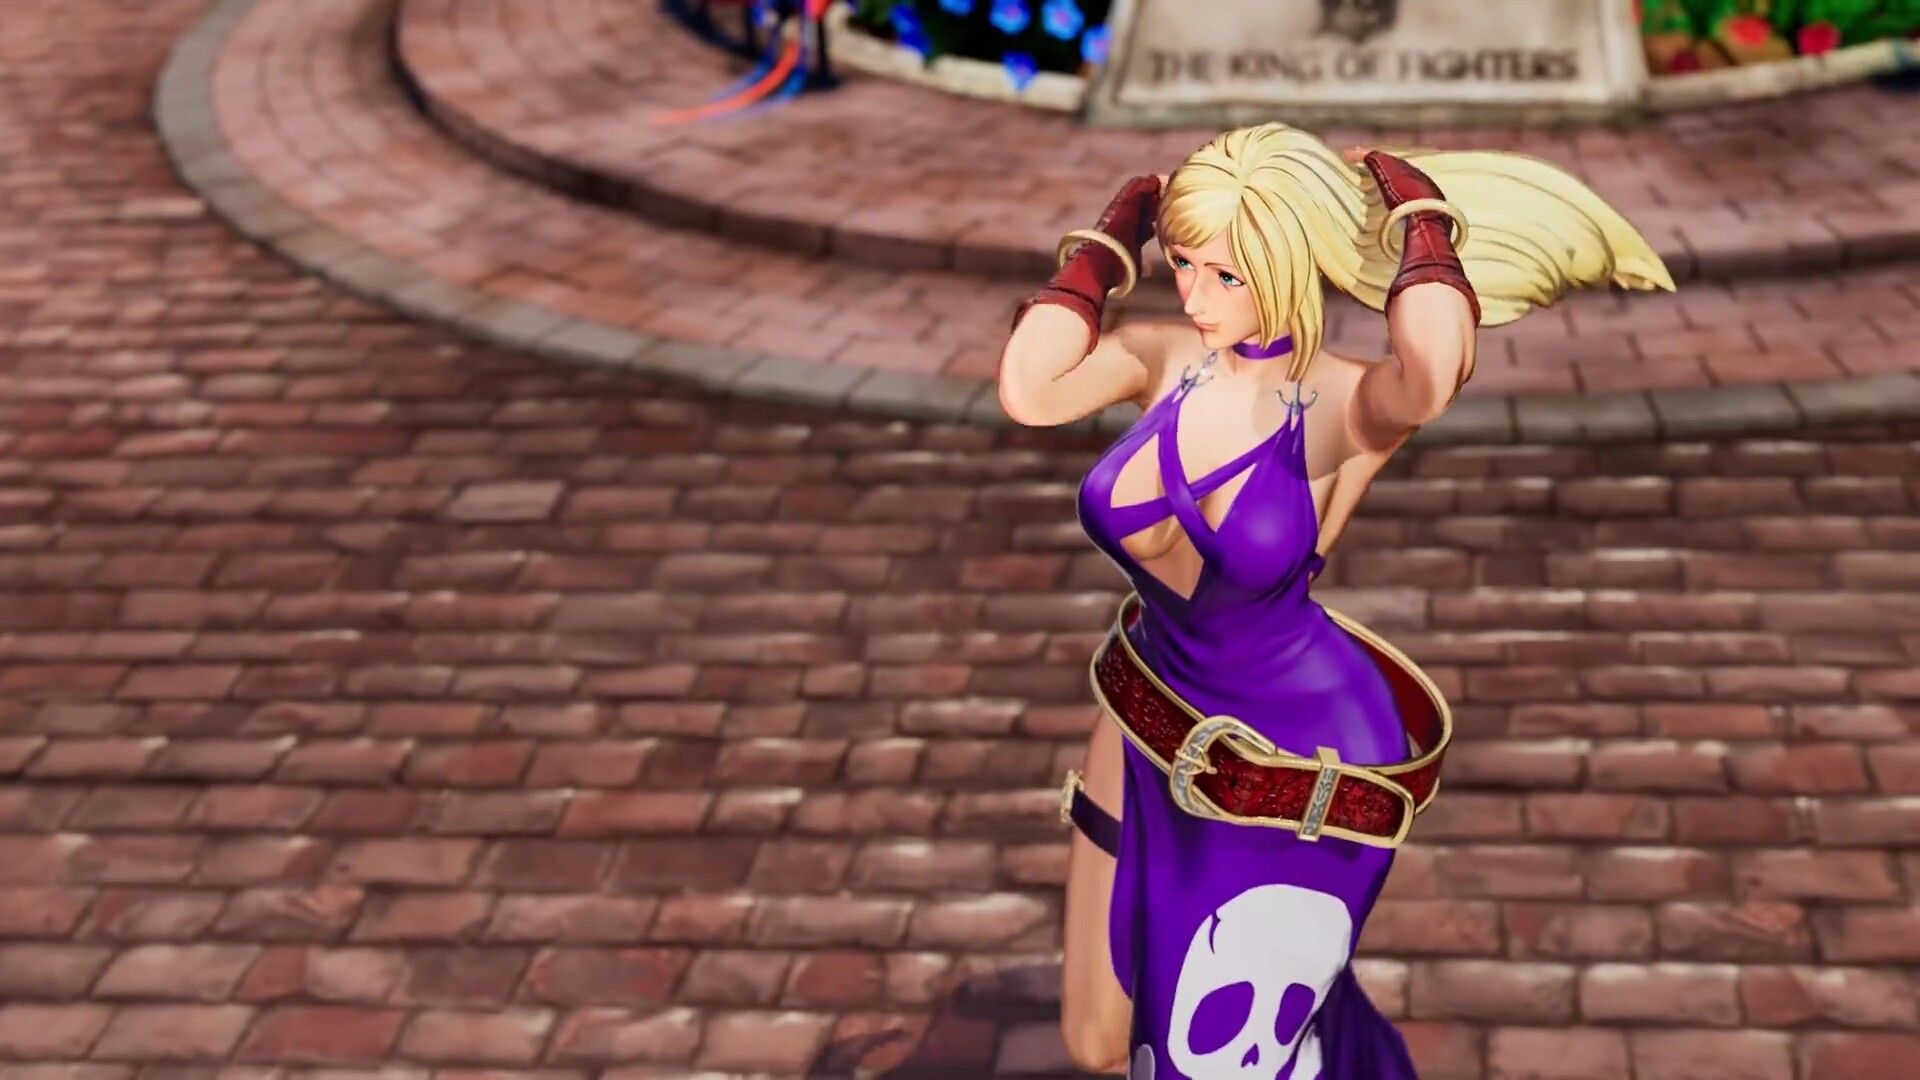 THE KING OF FIGHTERS XV B. Jenny enters the DLC in an erotic dress with and rounded thighs 4